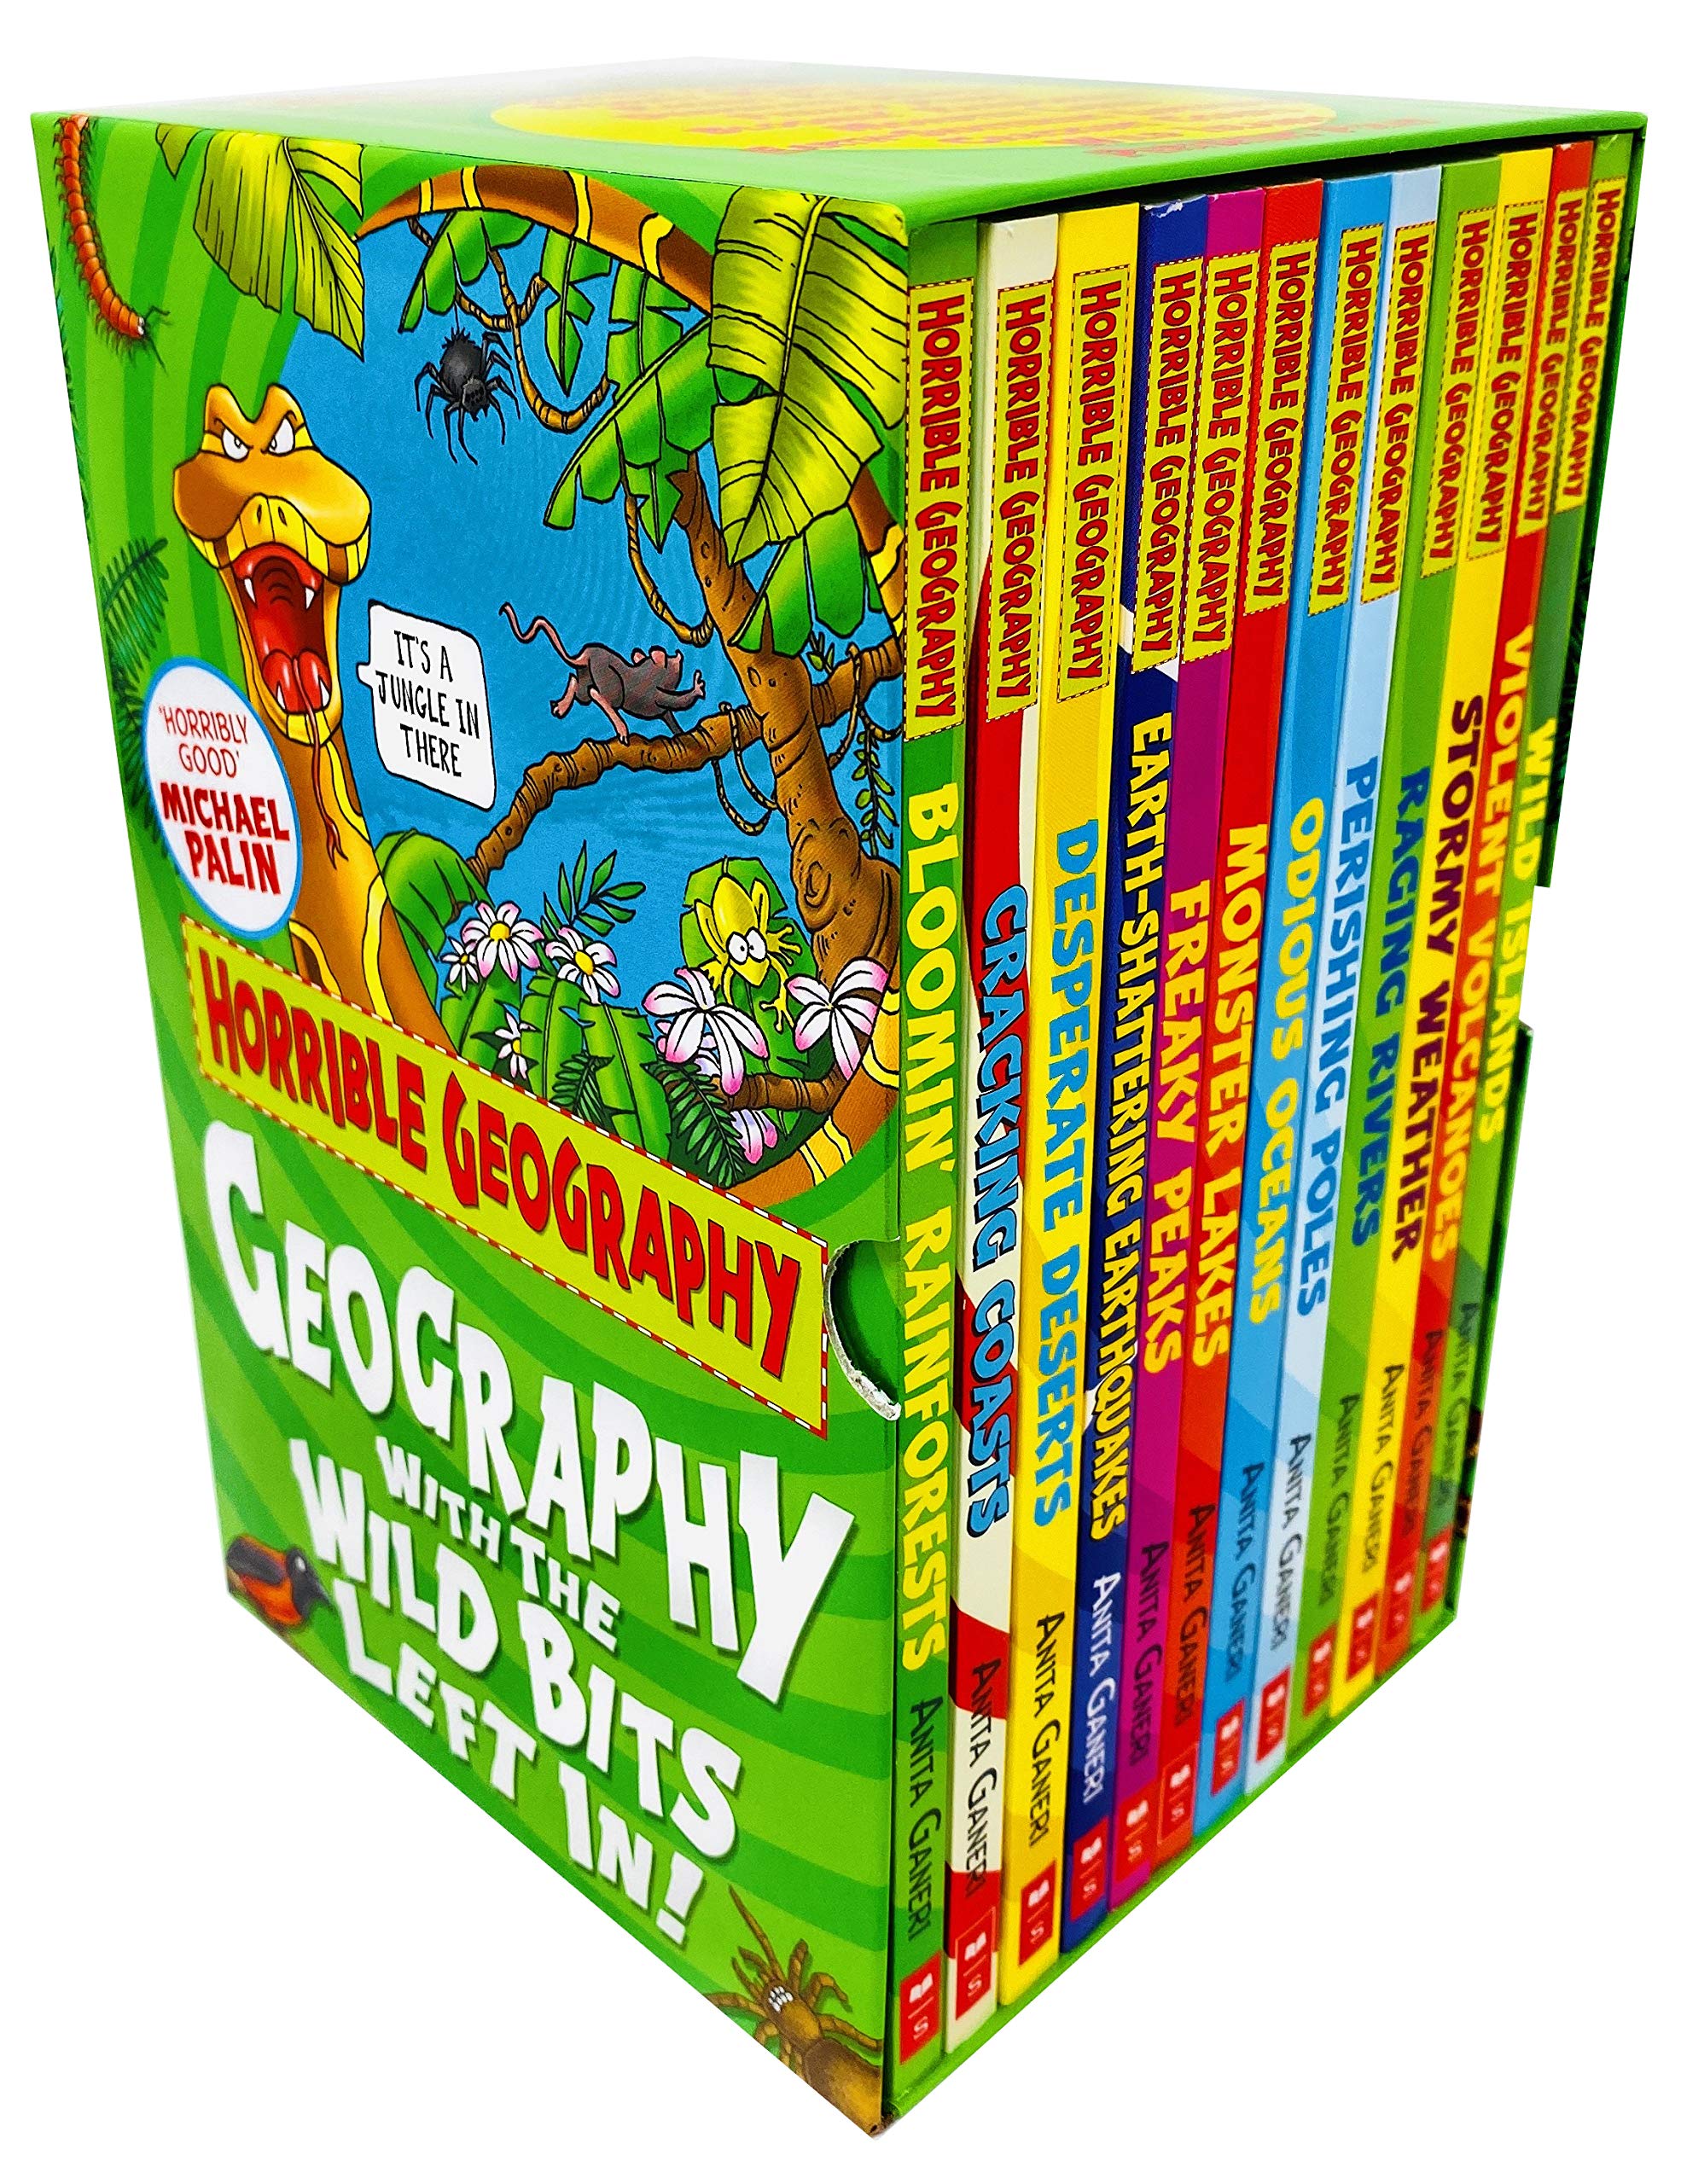 Horrible Geography 12 Books Box Collection Set by Anita Ganeri Paperback ( Wild Islands ) - Lets Buy Books